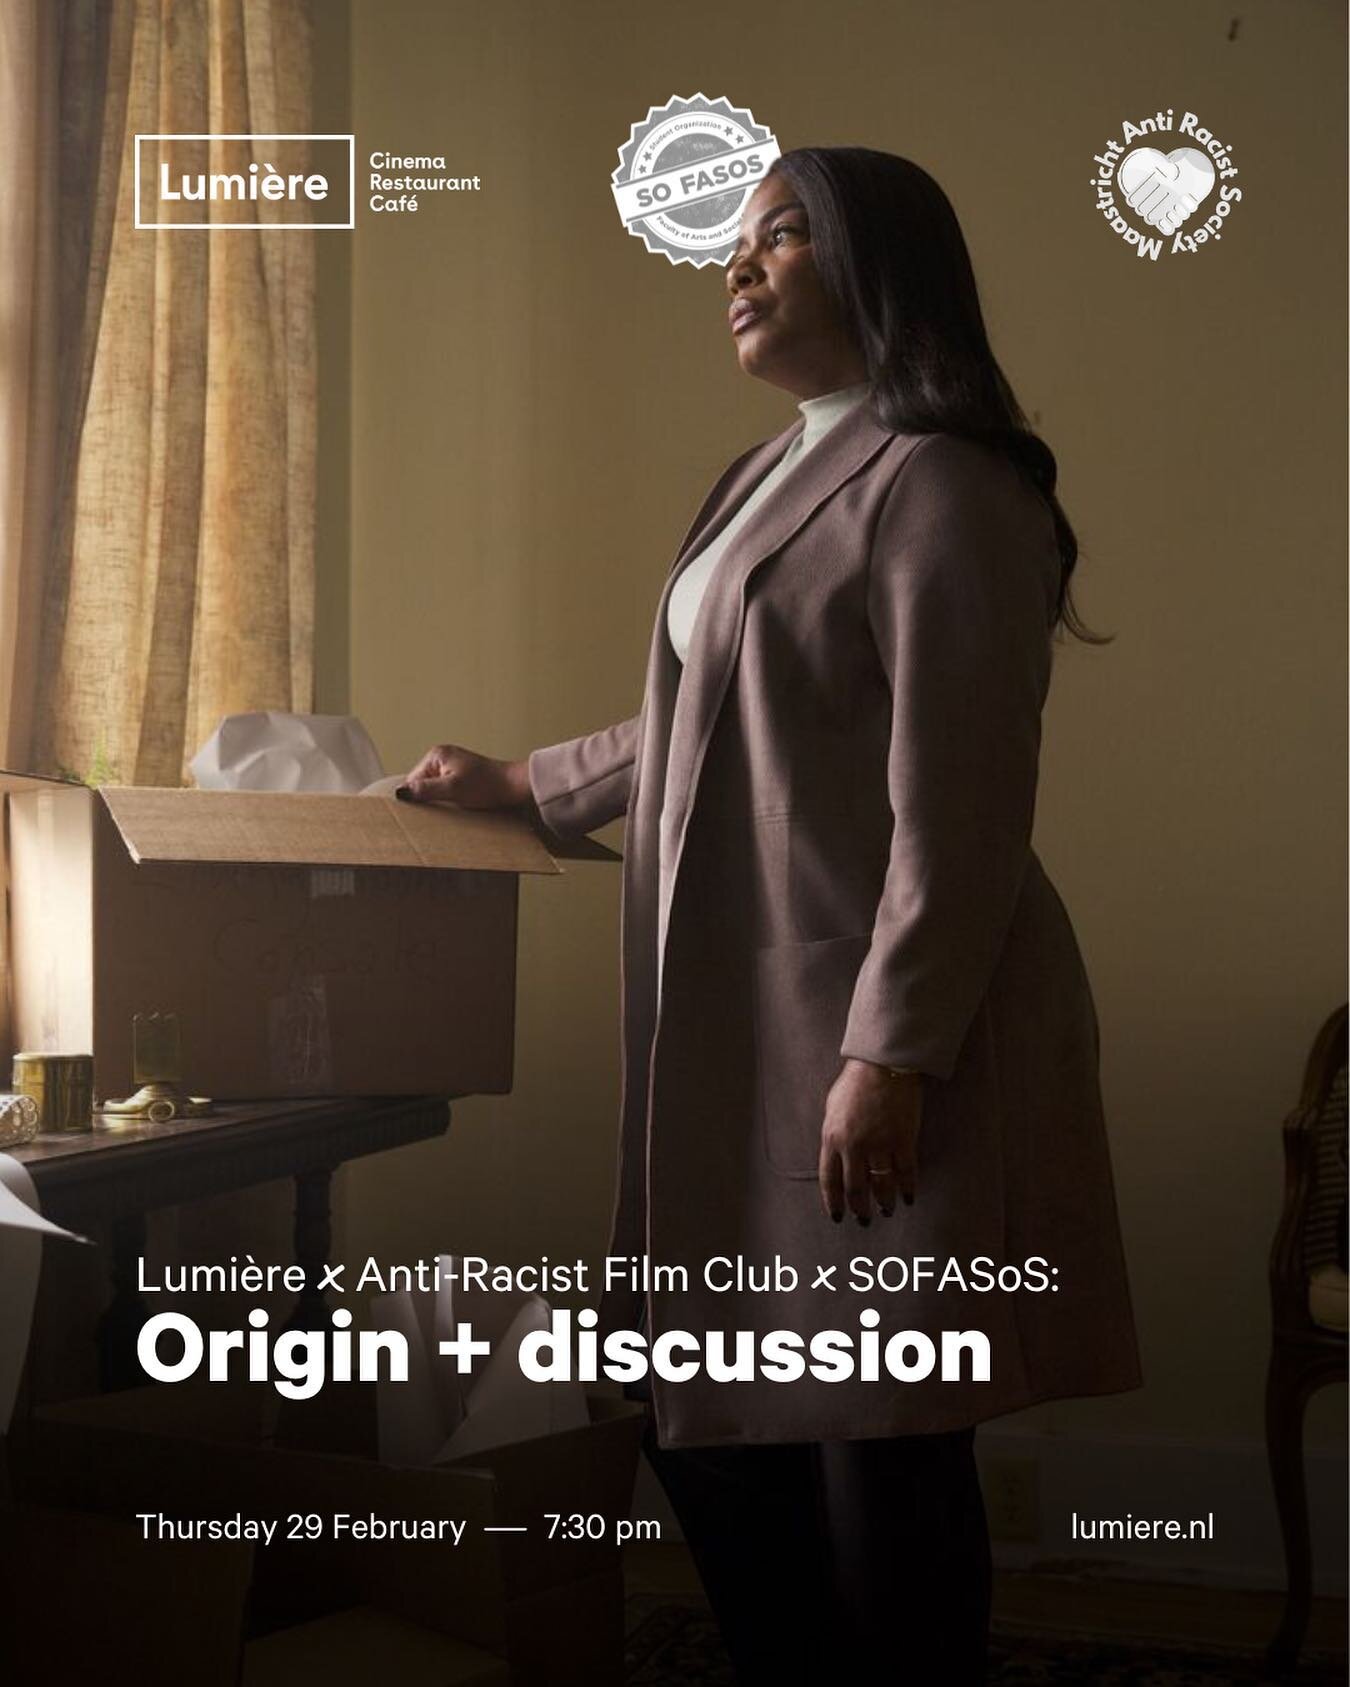 Join us at @lumieremaastricht on February 29th from 7:15pm on to enjoy the screening of Origin! 💥

Ava DuVernay&rsquo;s film Origin unfolds the journey of author Isabel Wilkerson as she explores the origins of racism, inspired by her influential boo